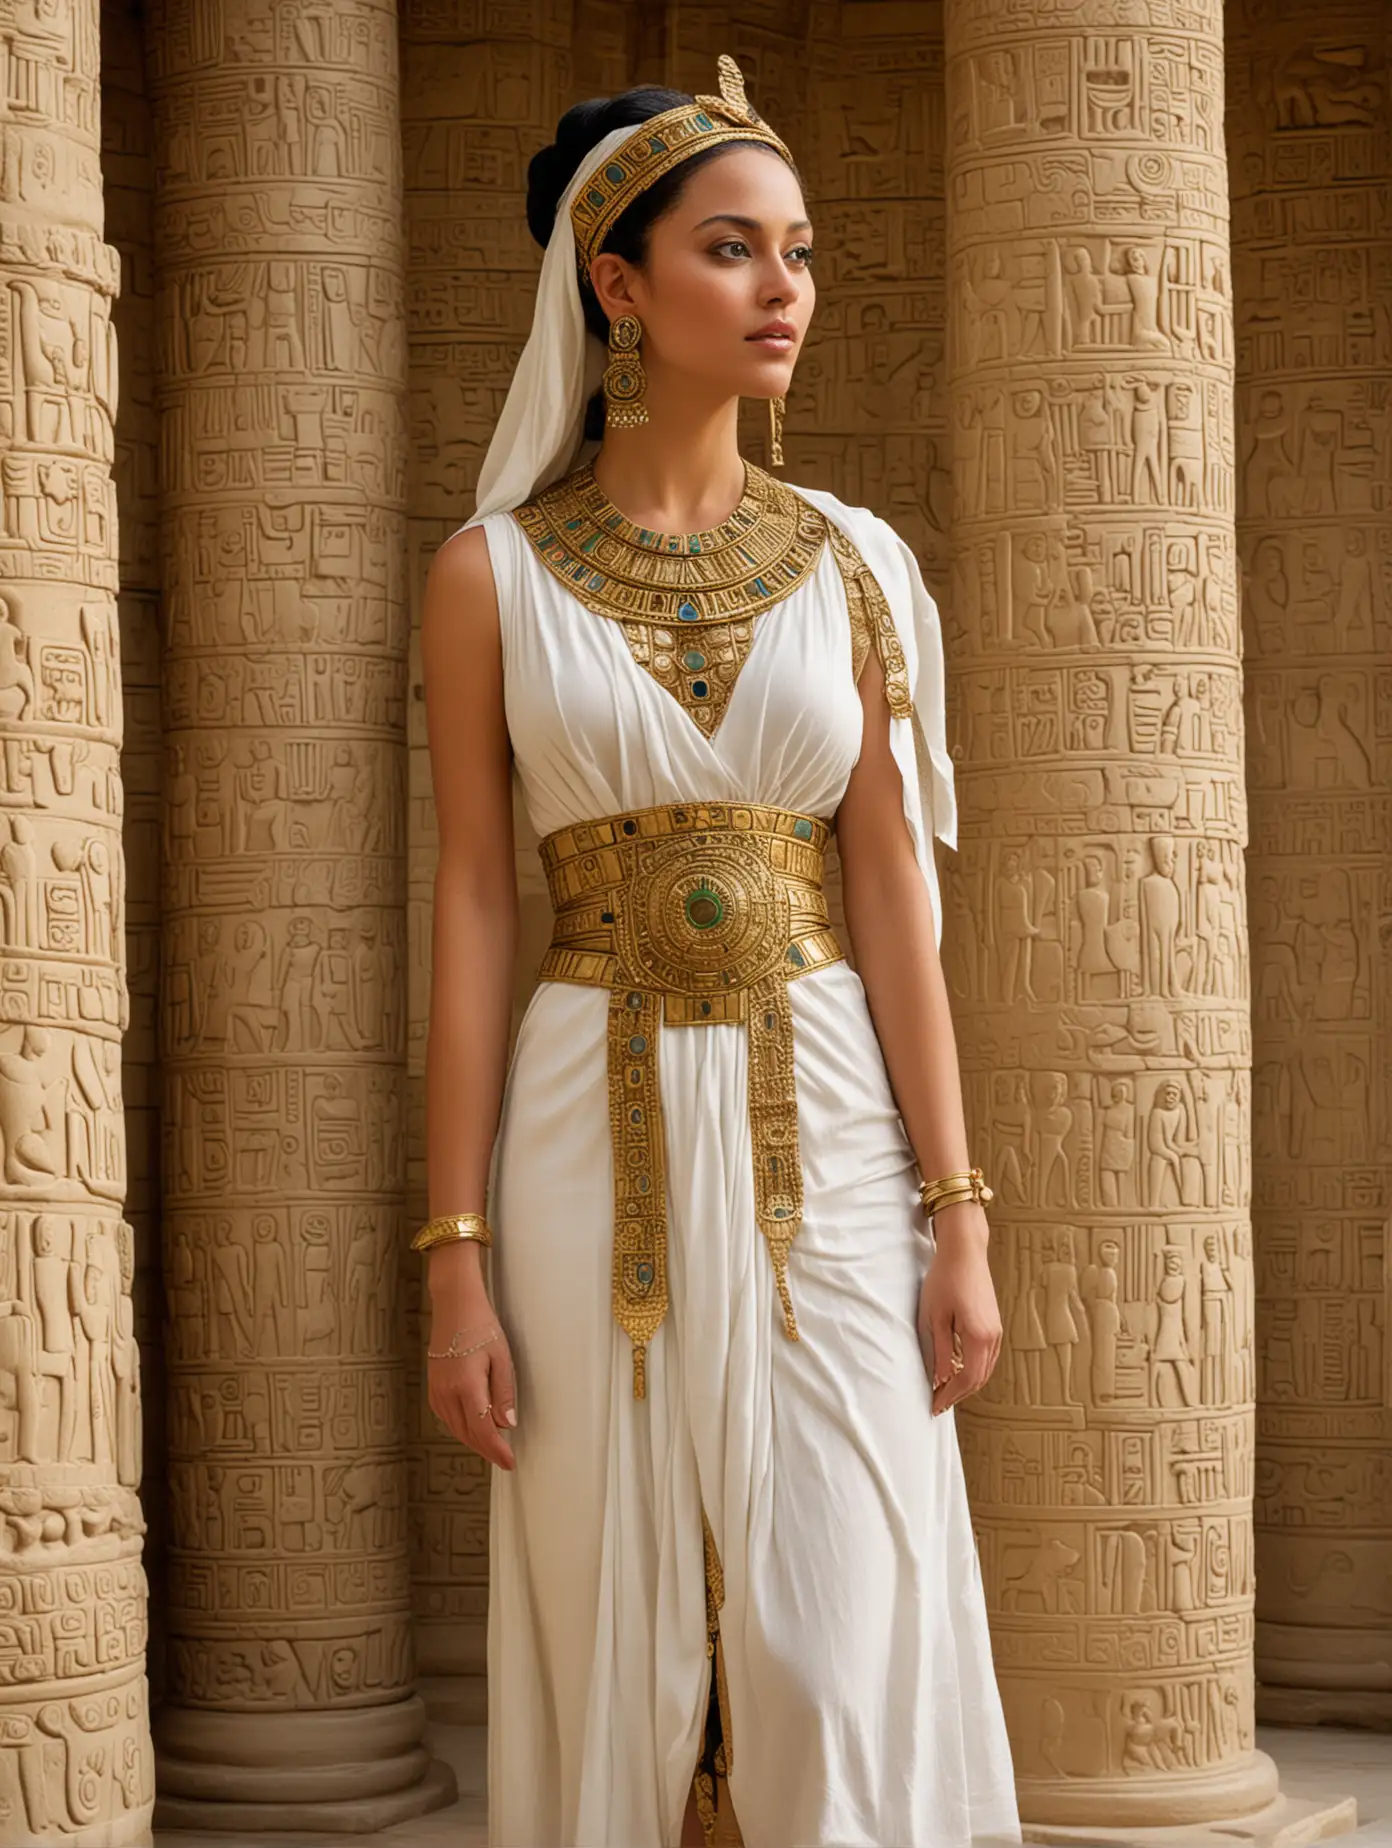 Queen-of-Sheba-in-the-Temple-of-the-Sun